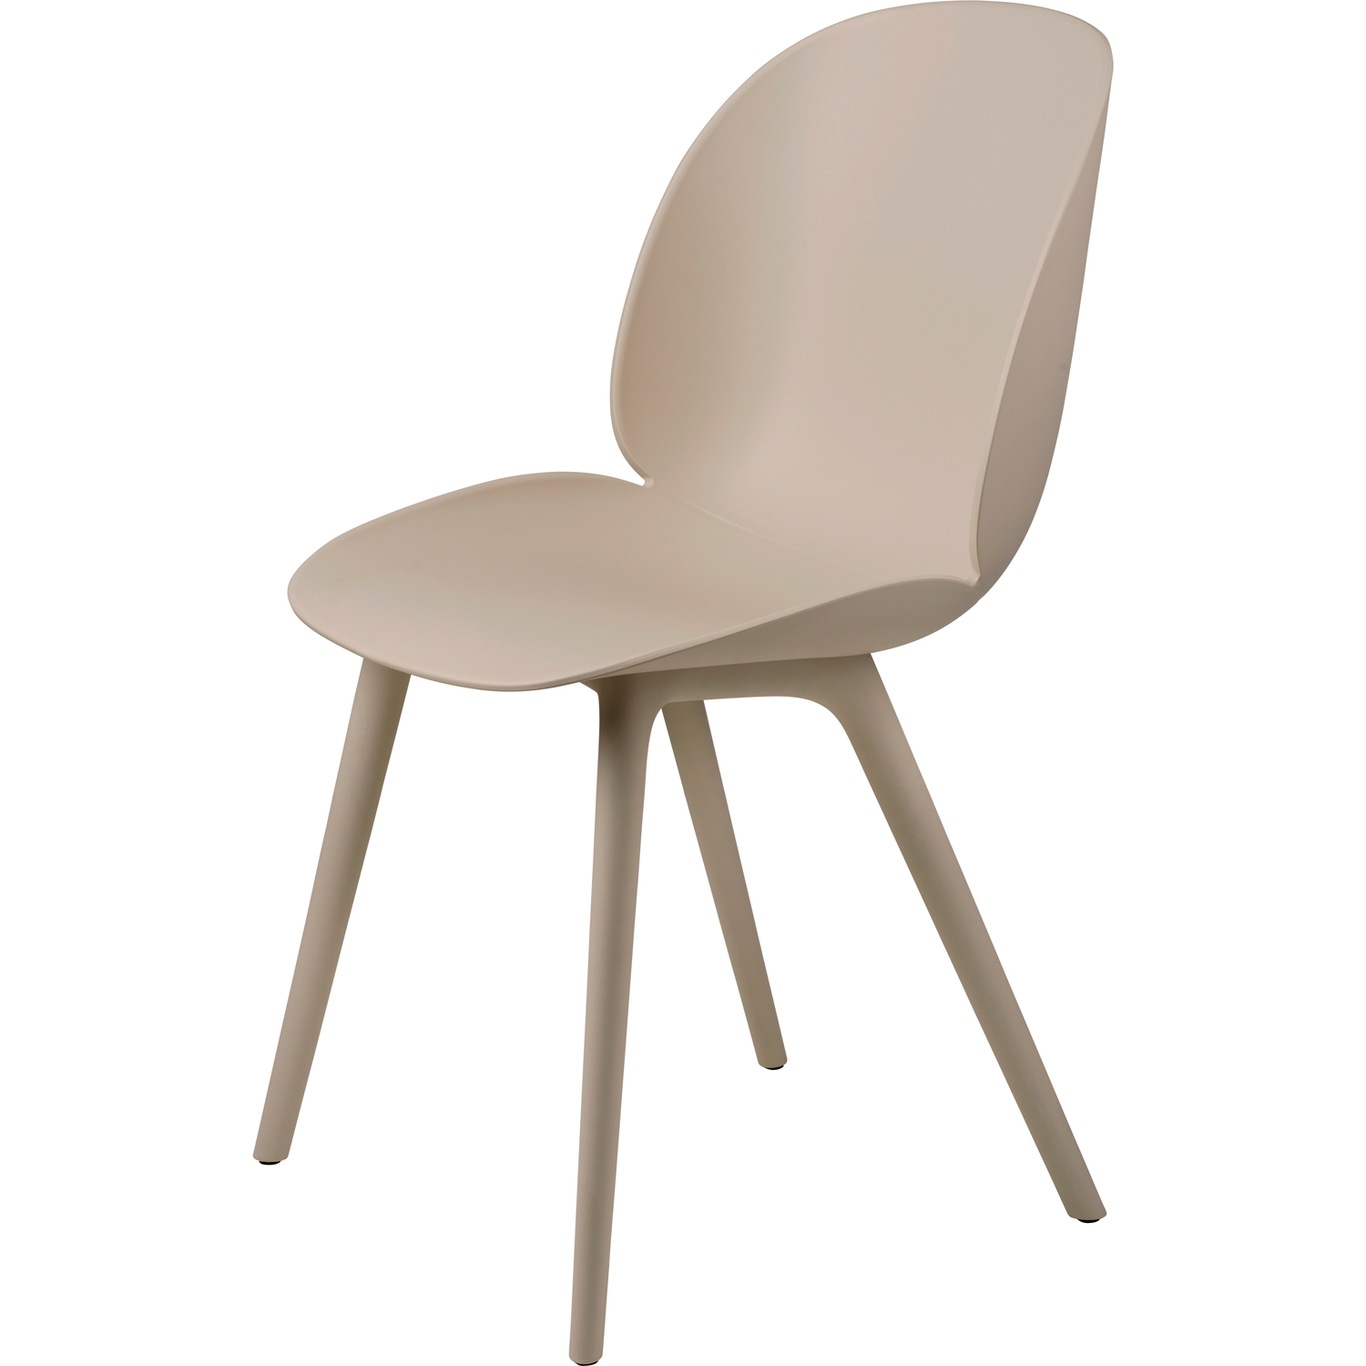 Beetle Dining Chair Outdoor, New Beige